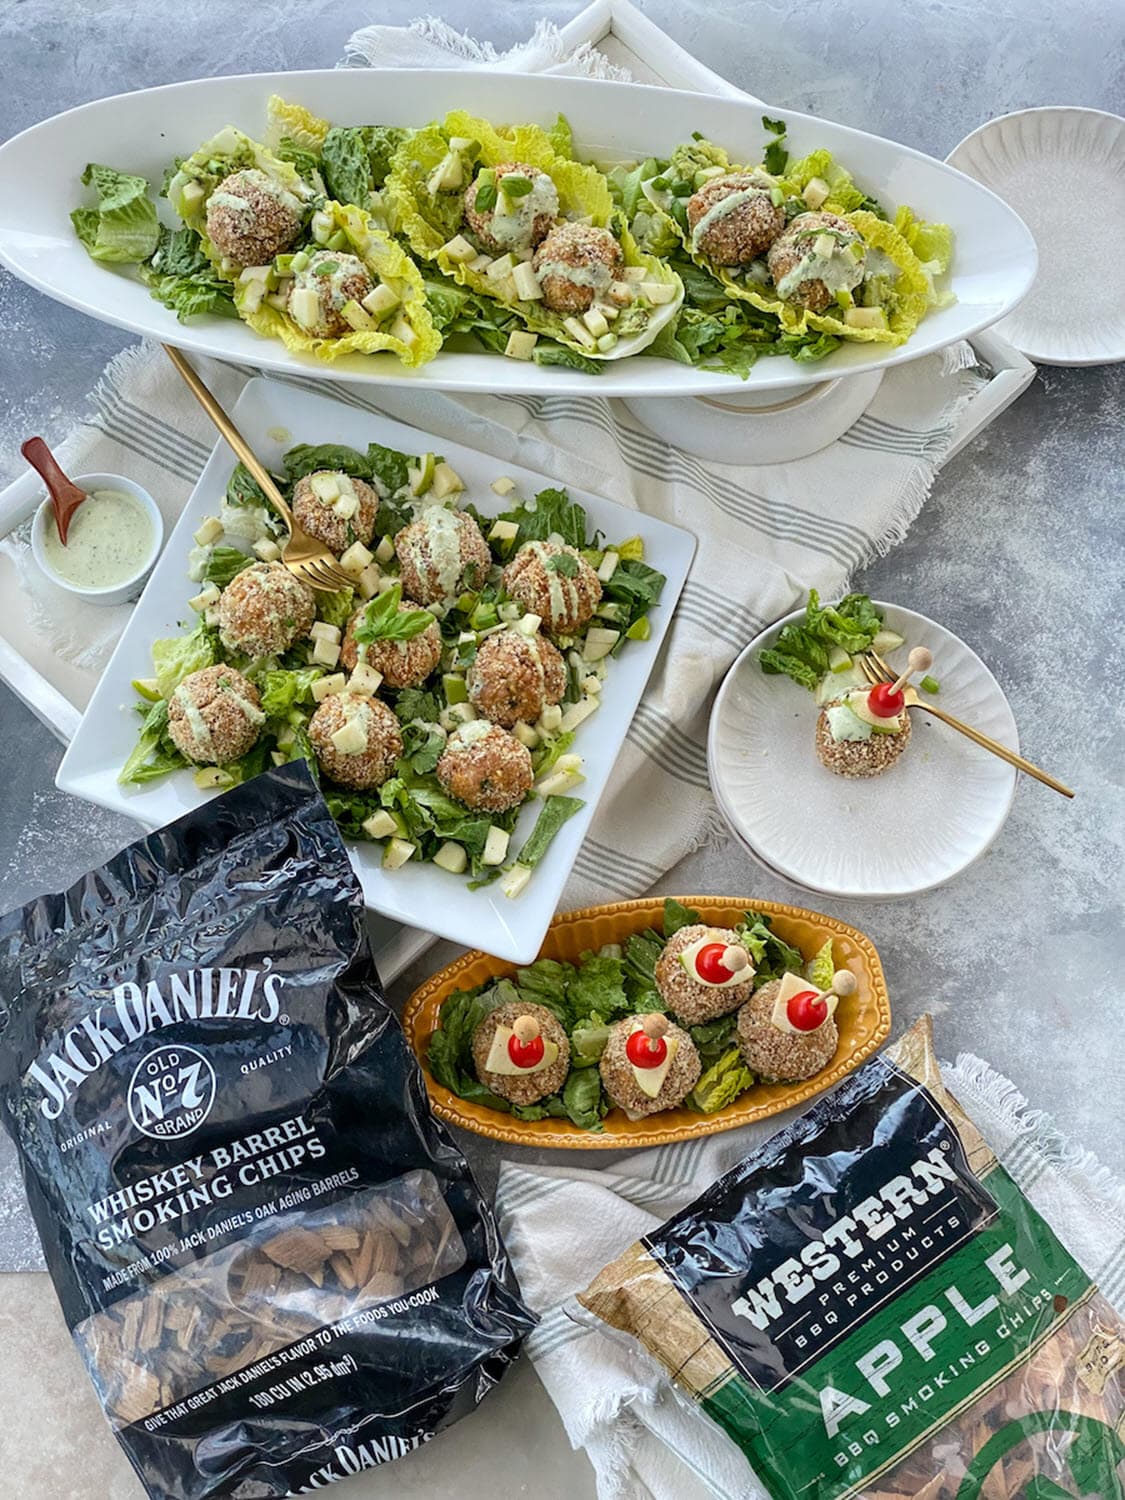 Chicken meatball lettuce wraps, skewers with bags of smoking chips